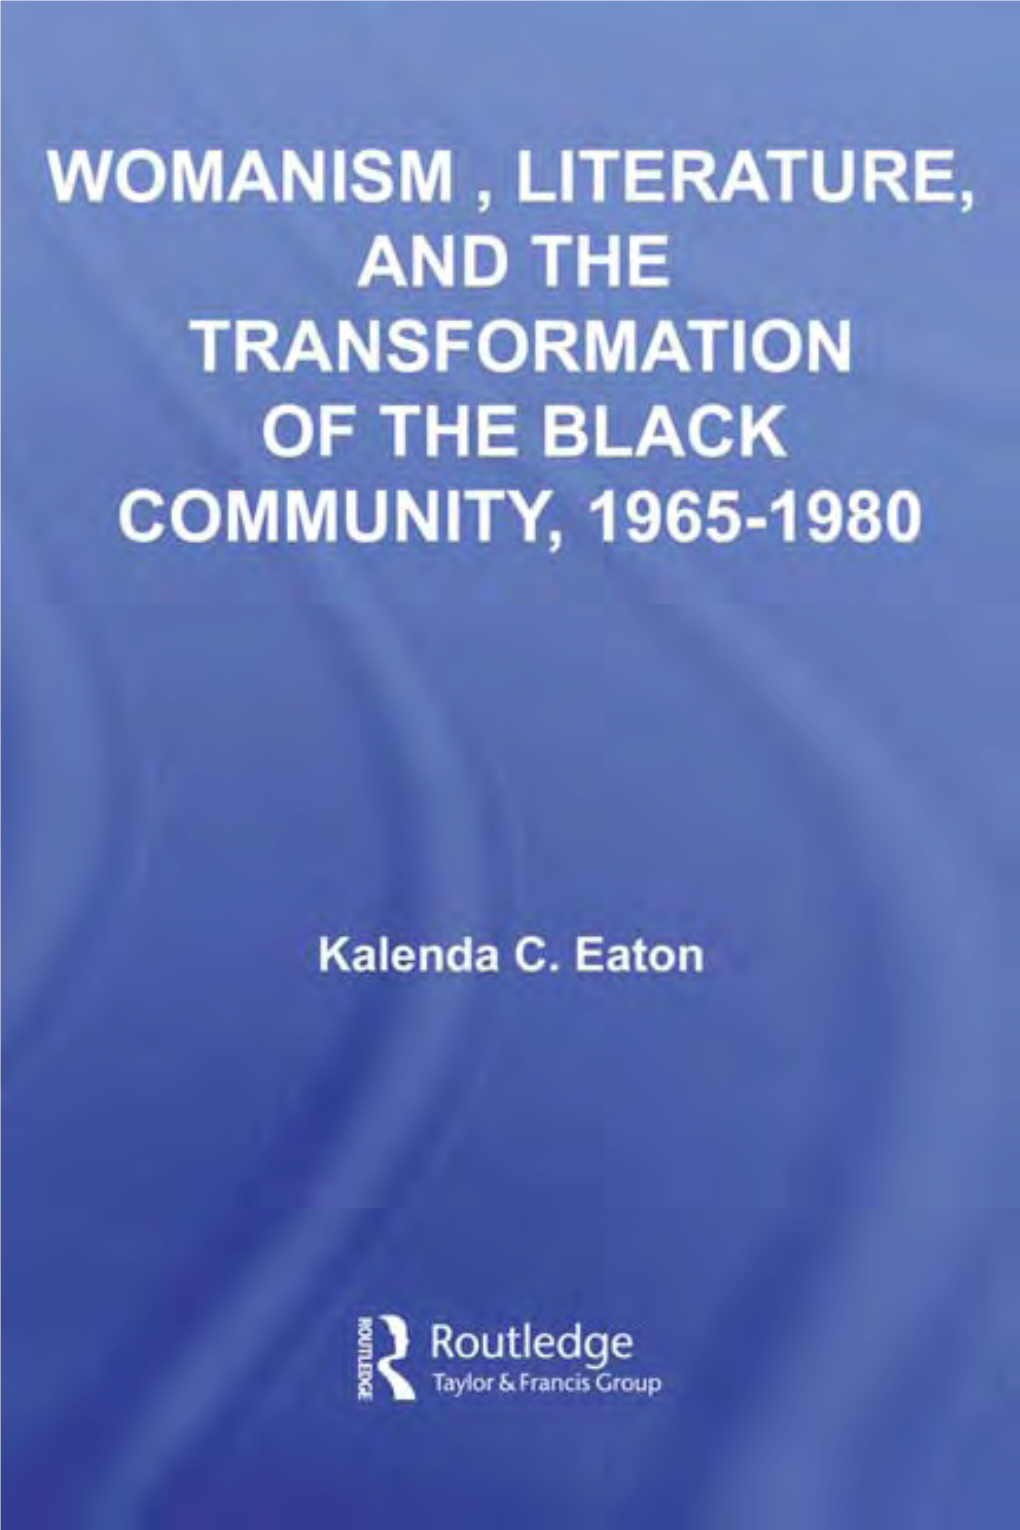 Womanism, Literature, and the Transformation of the Black Community, 1965-1980